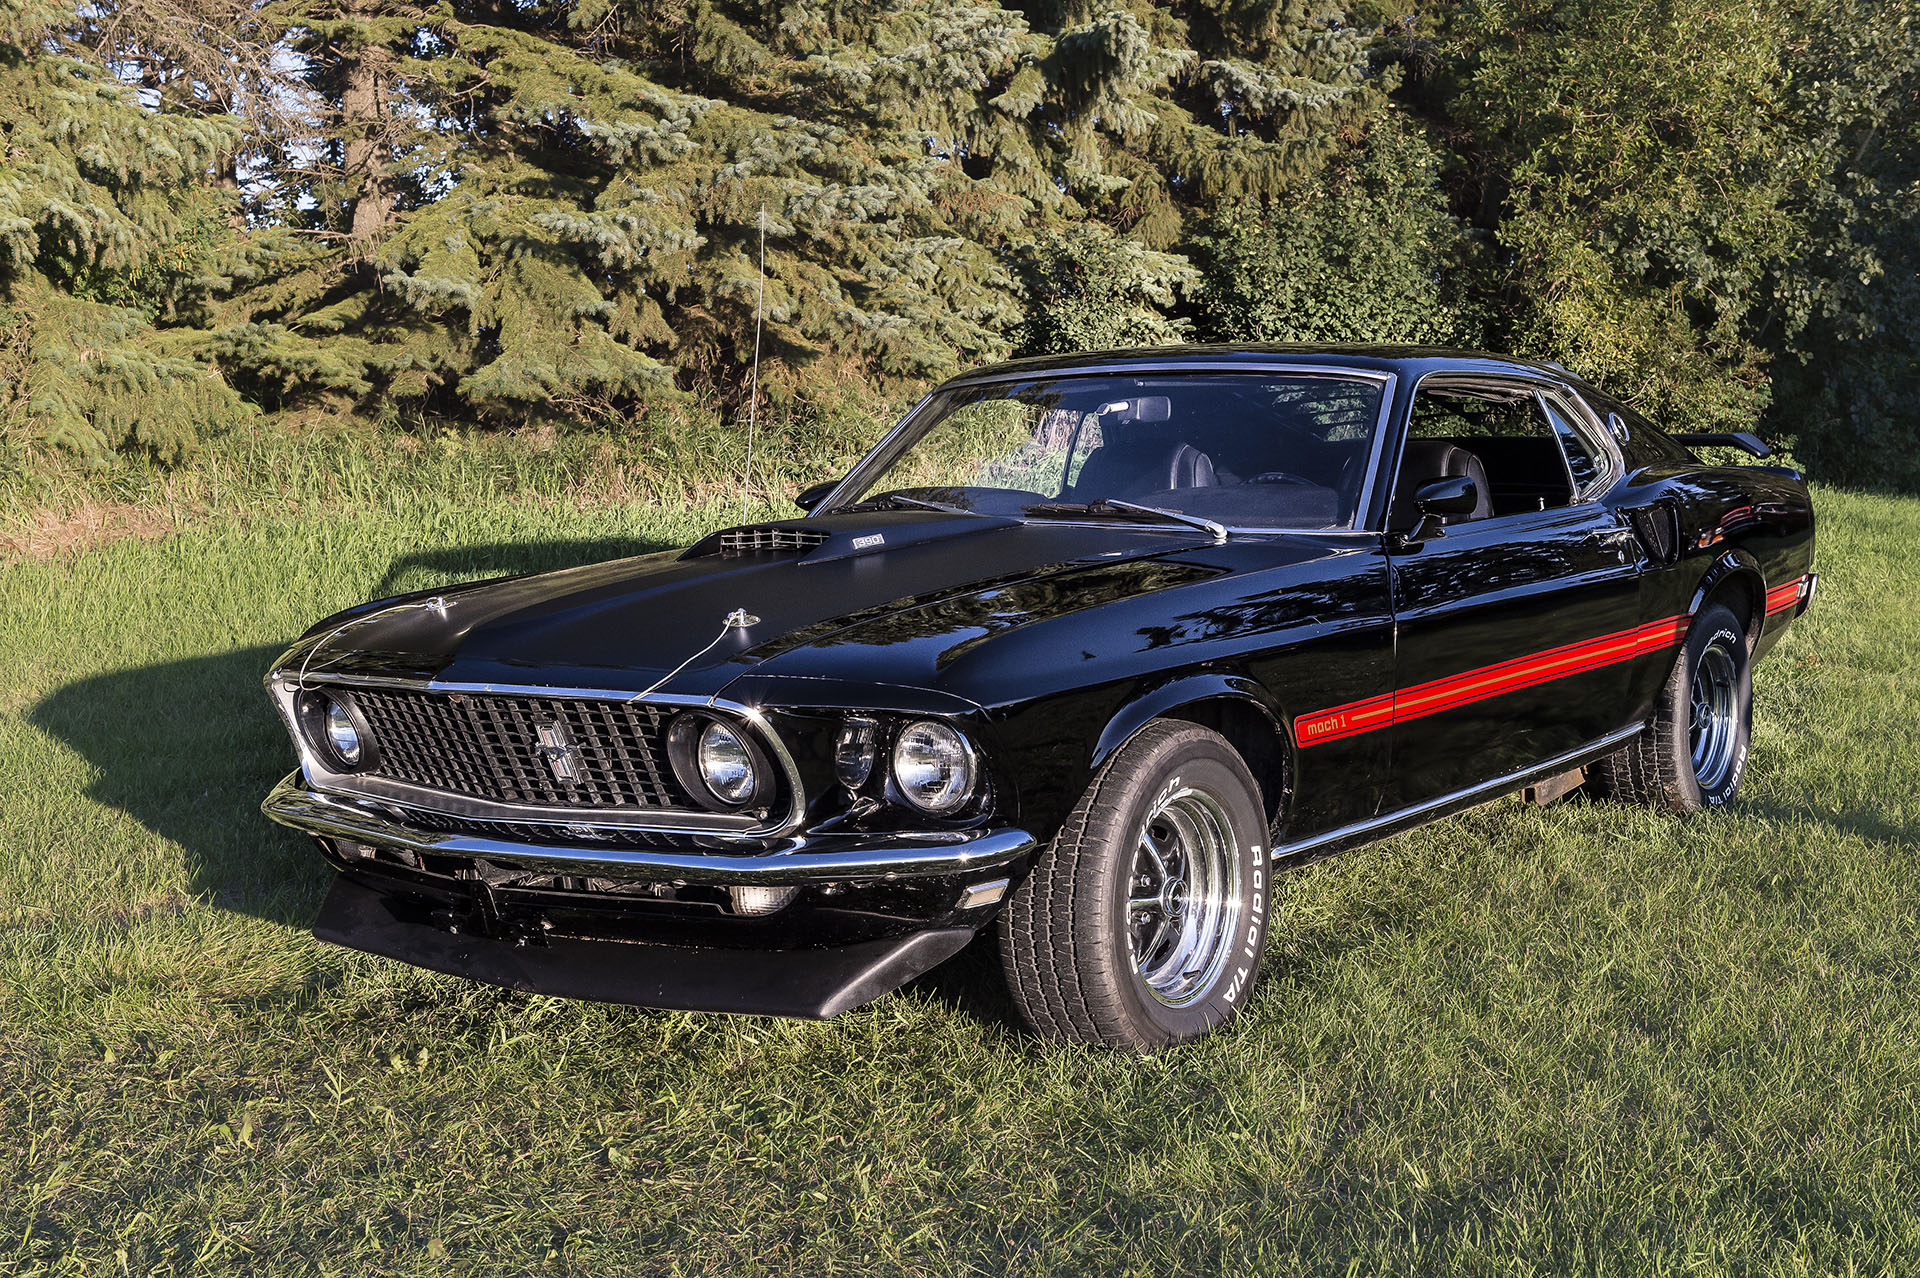  1969 Mustang Mach 1  This car was pursued by the present owner for over 20 years. The previous owner decided to sell it, but only to someone would appreciate it and take it to the next level, which was exactly why the present owner was the only one 